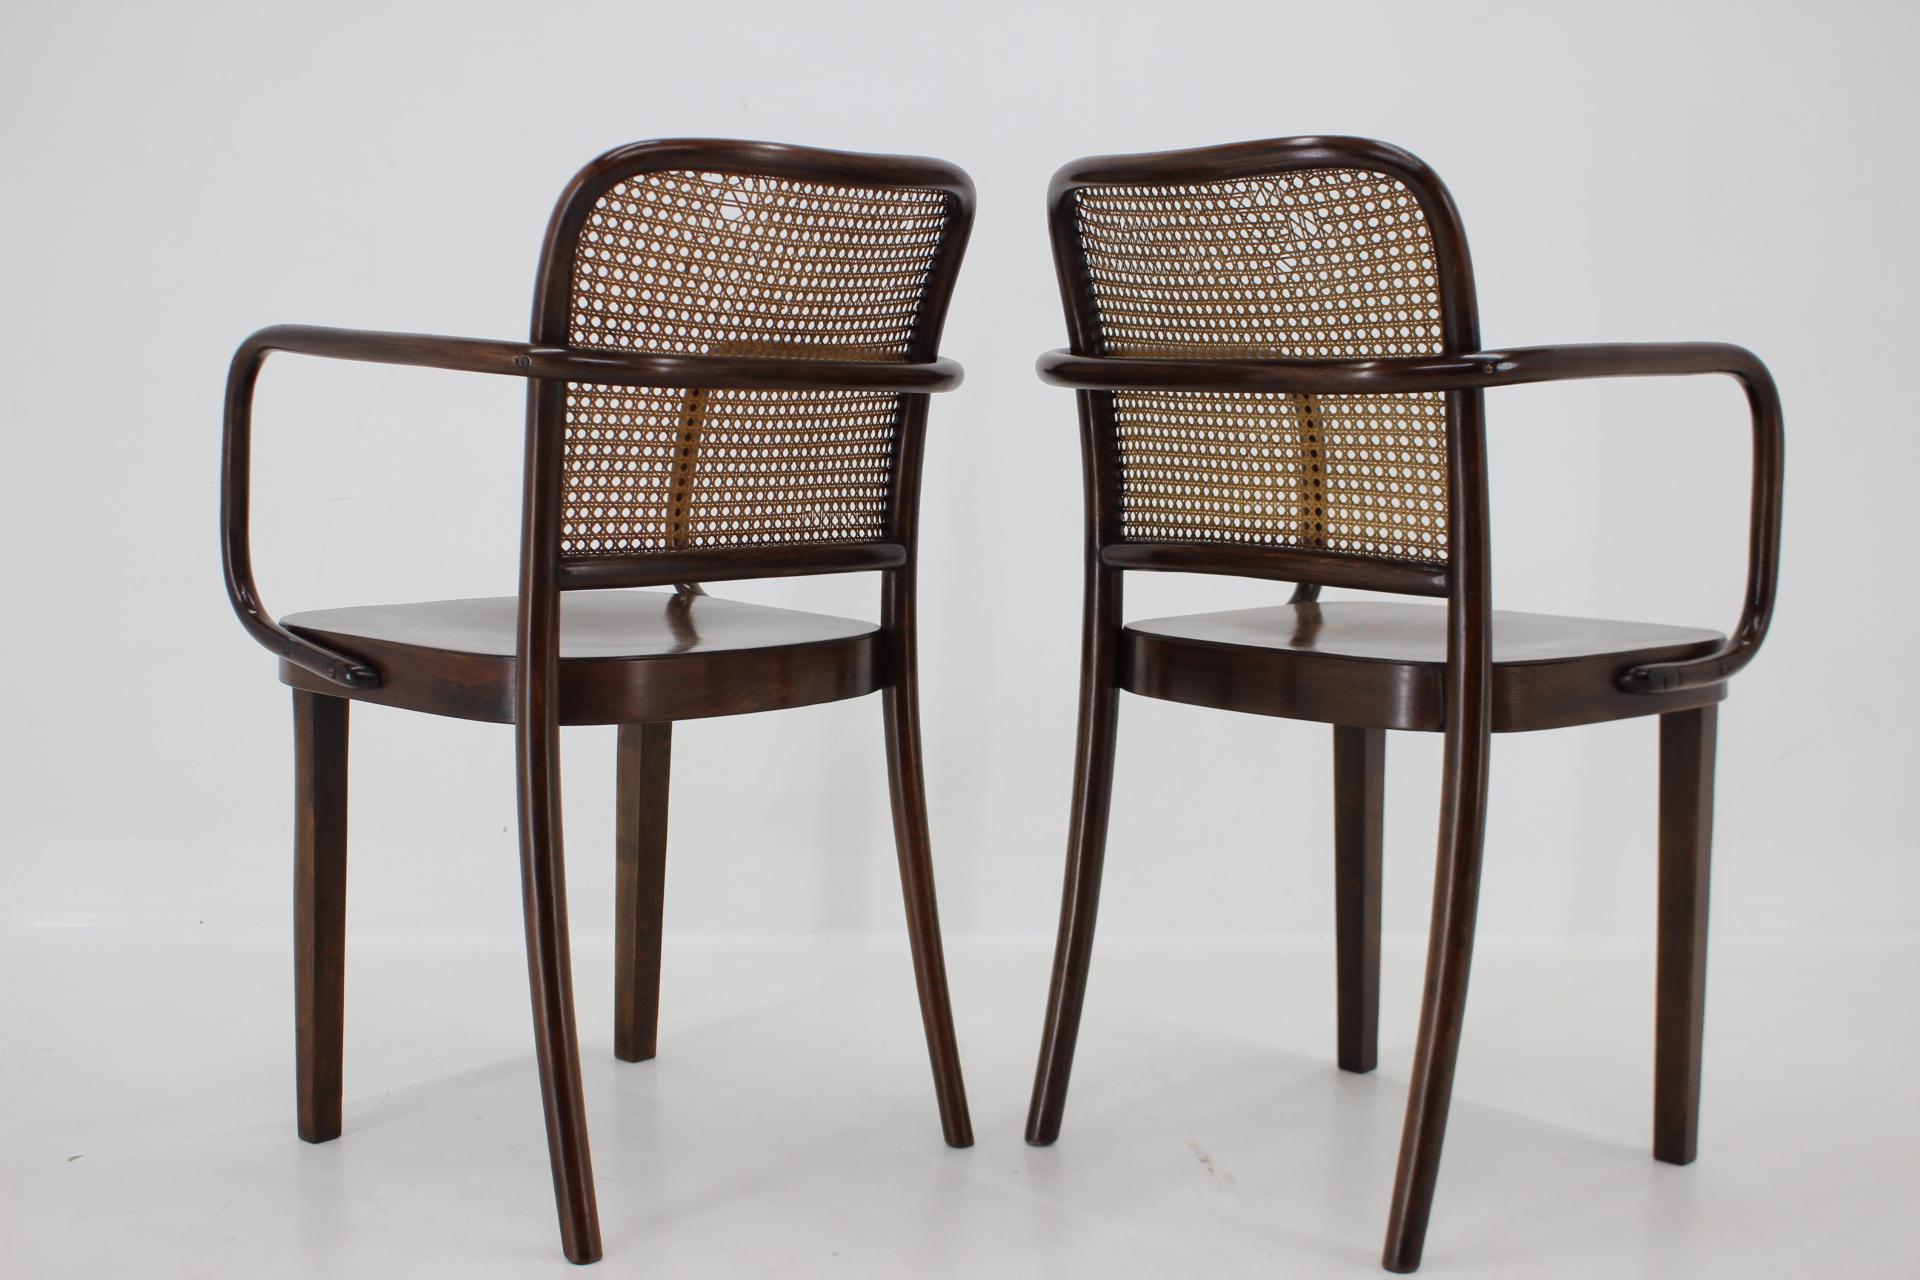 1920s Josef Hoffmann Bentwood Chairs, No. 811 for Thonet, Czechoslovakia For Sale 1